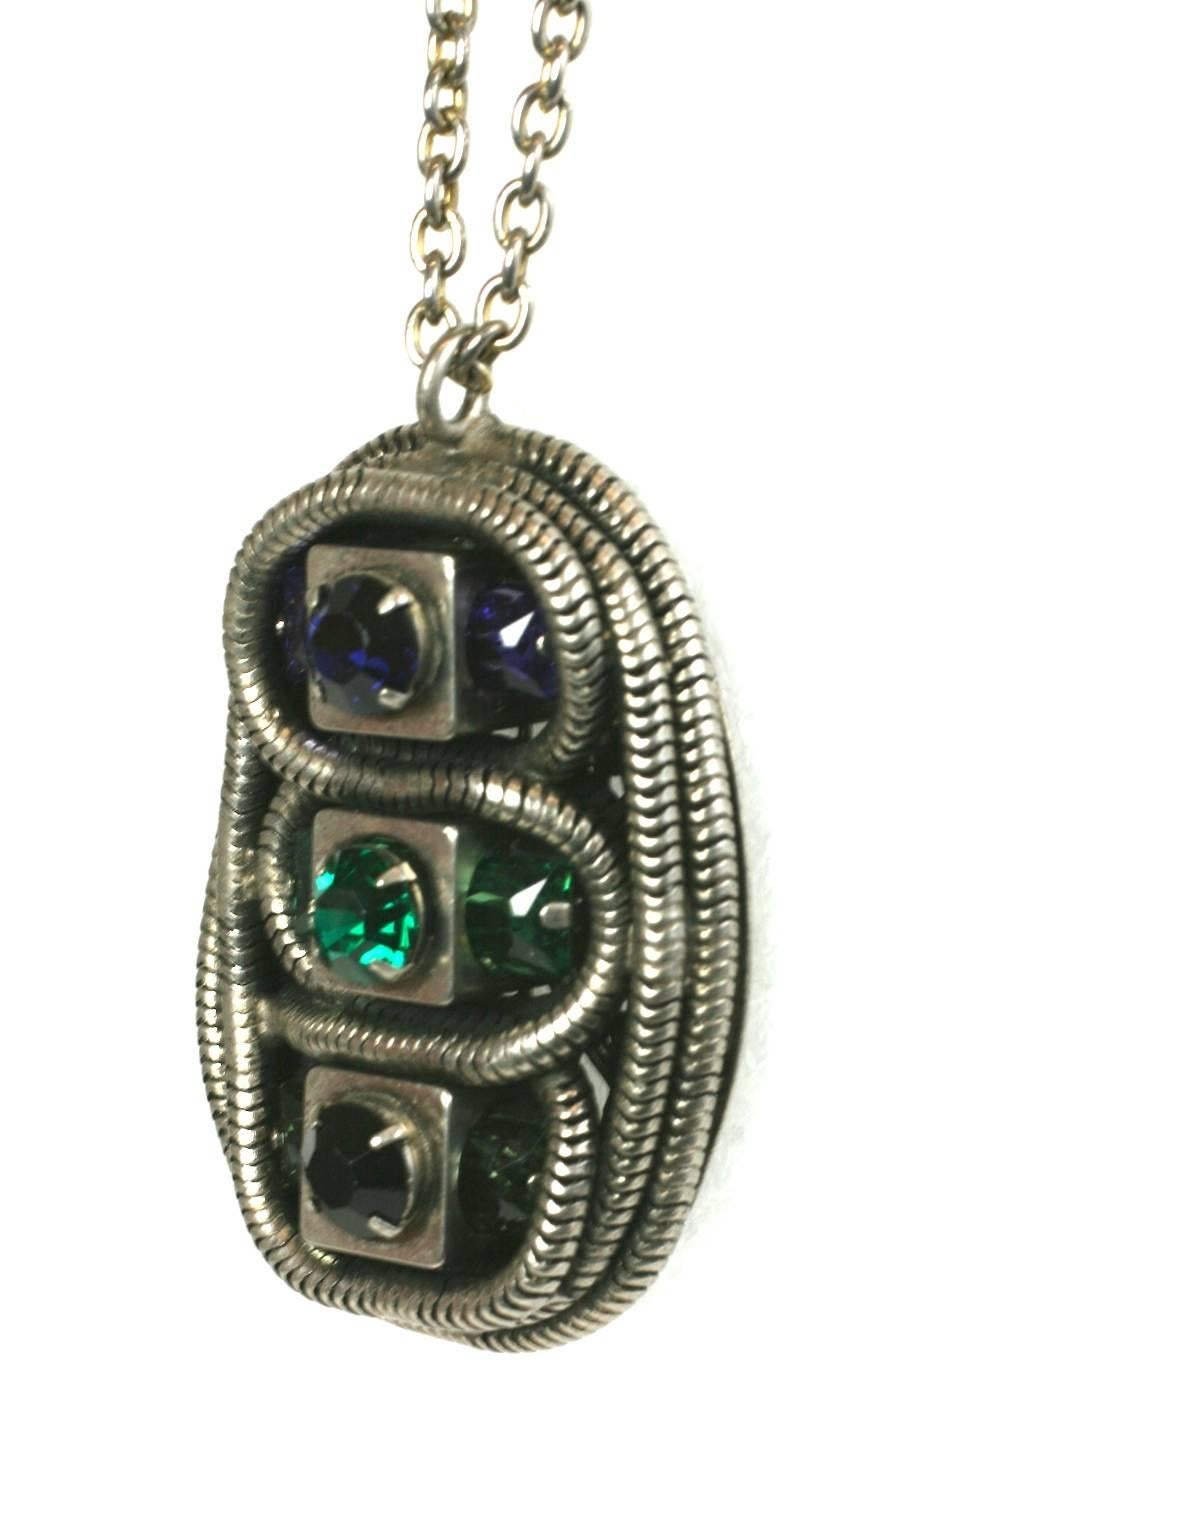 Yves Saint Laurent Early Pendant by Scemama 1970's. Striking design with vari cut stones in deep blue, emerald and jet layered within a pendant built up from coiling snake chaining and fitted onto a filigree base. There are square cut stones nestled